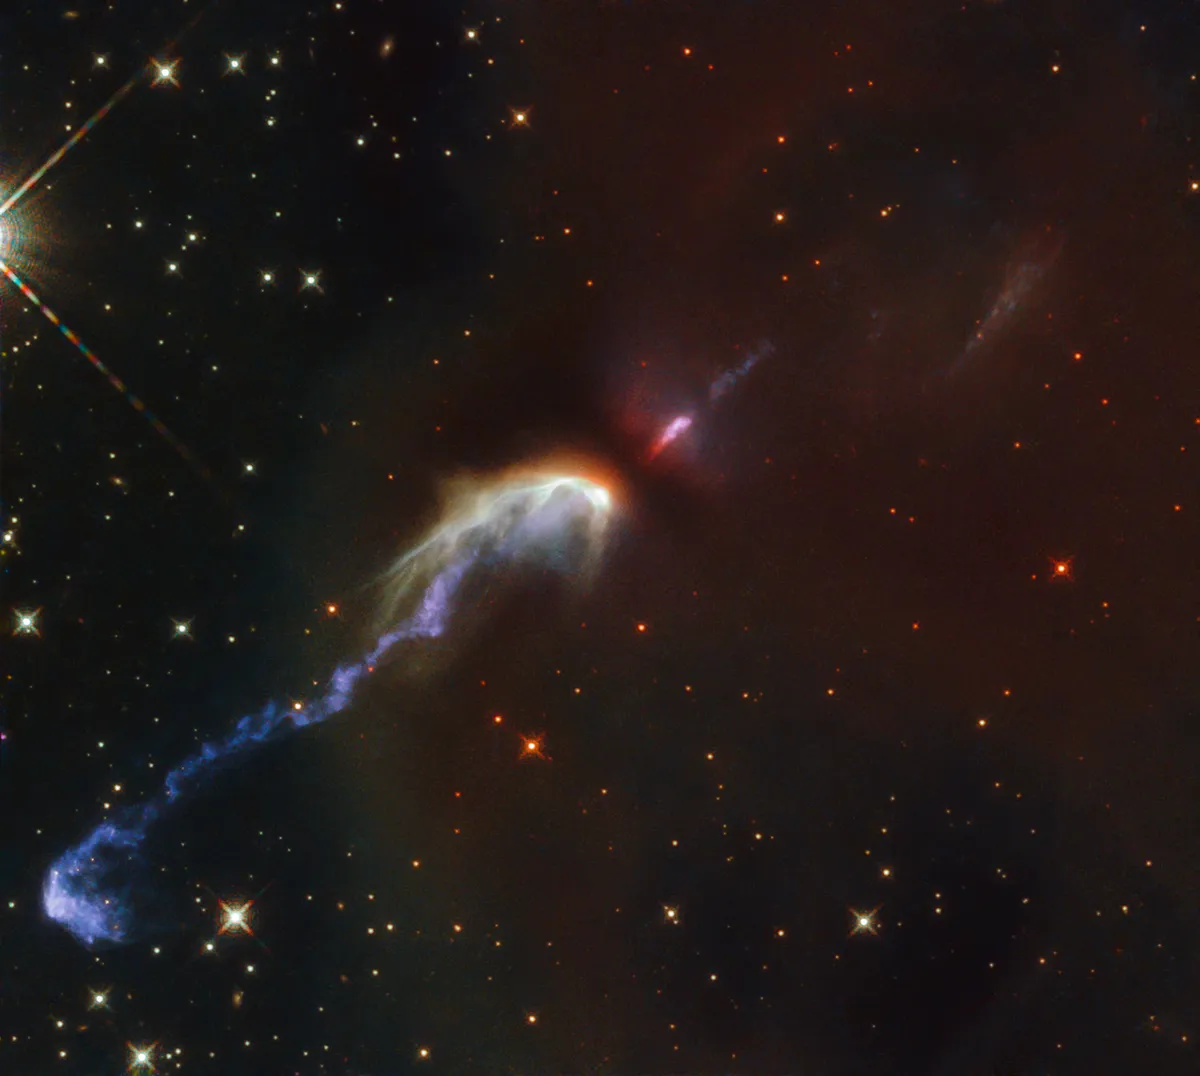 Two Herbig-Haro objects can be seen in this Hubble Space Telescope image, catalogued as HH46 and HH47. Credit: ESA/Hubble & NASA, B. Nisini